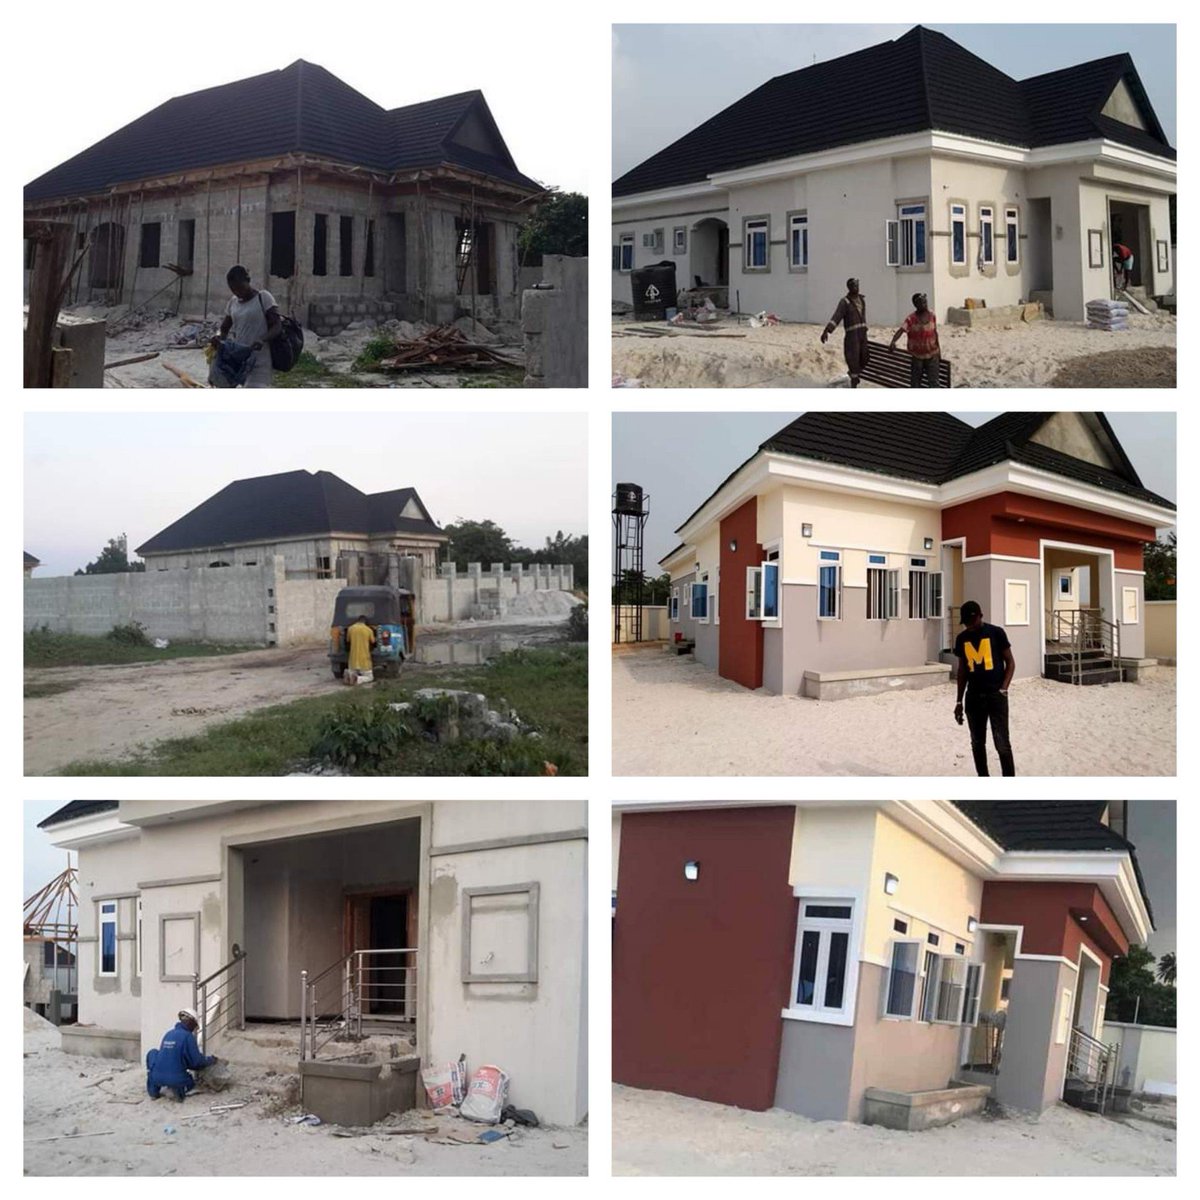 Asom Architects Twitter Tweet: This is a job we started last year and delivered within 3months from middle of october to 2days to christmas for our client in warri delta state. from foundation level to finishing level..
Tel. 08144181499
#Asom_Architects.
Credits: Ehiagwinan Simpple https://t.co/qMLpbeJKvr